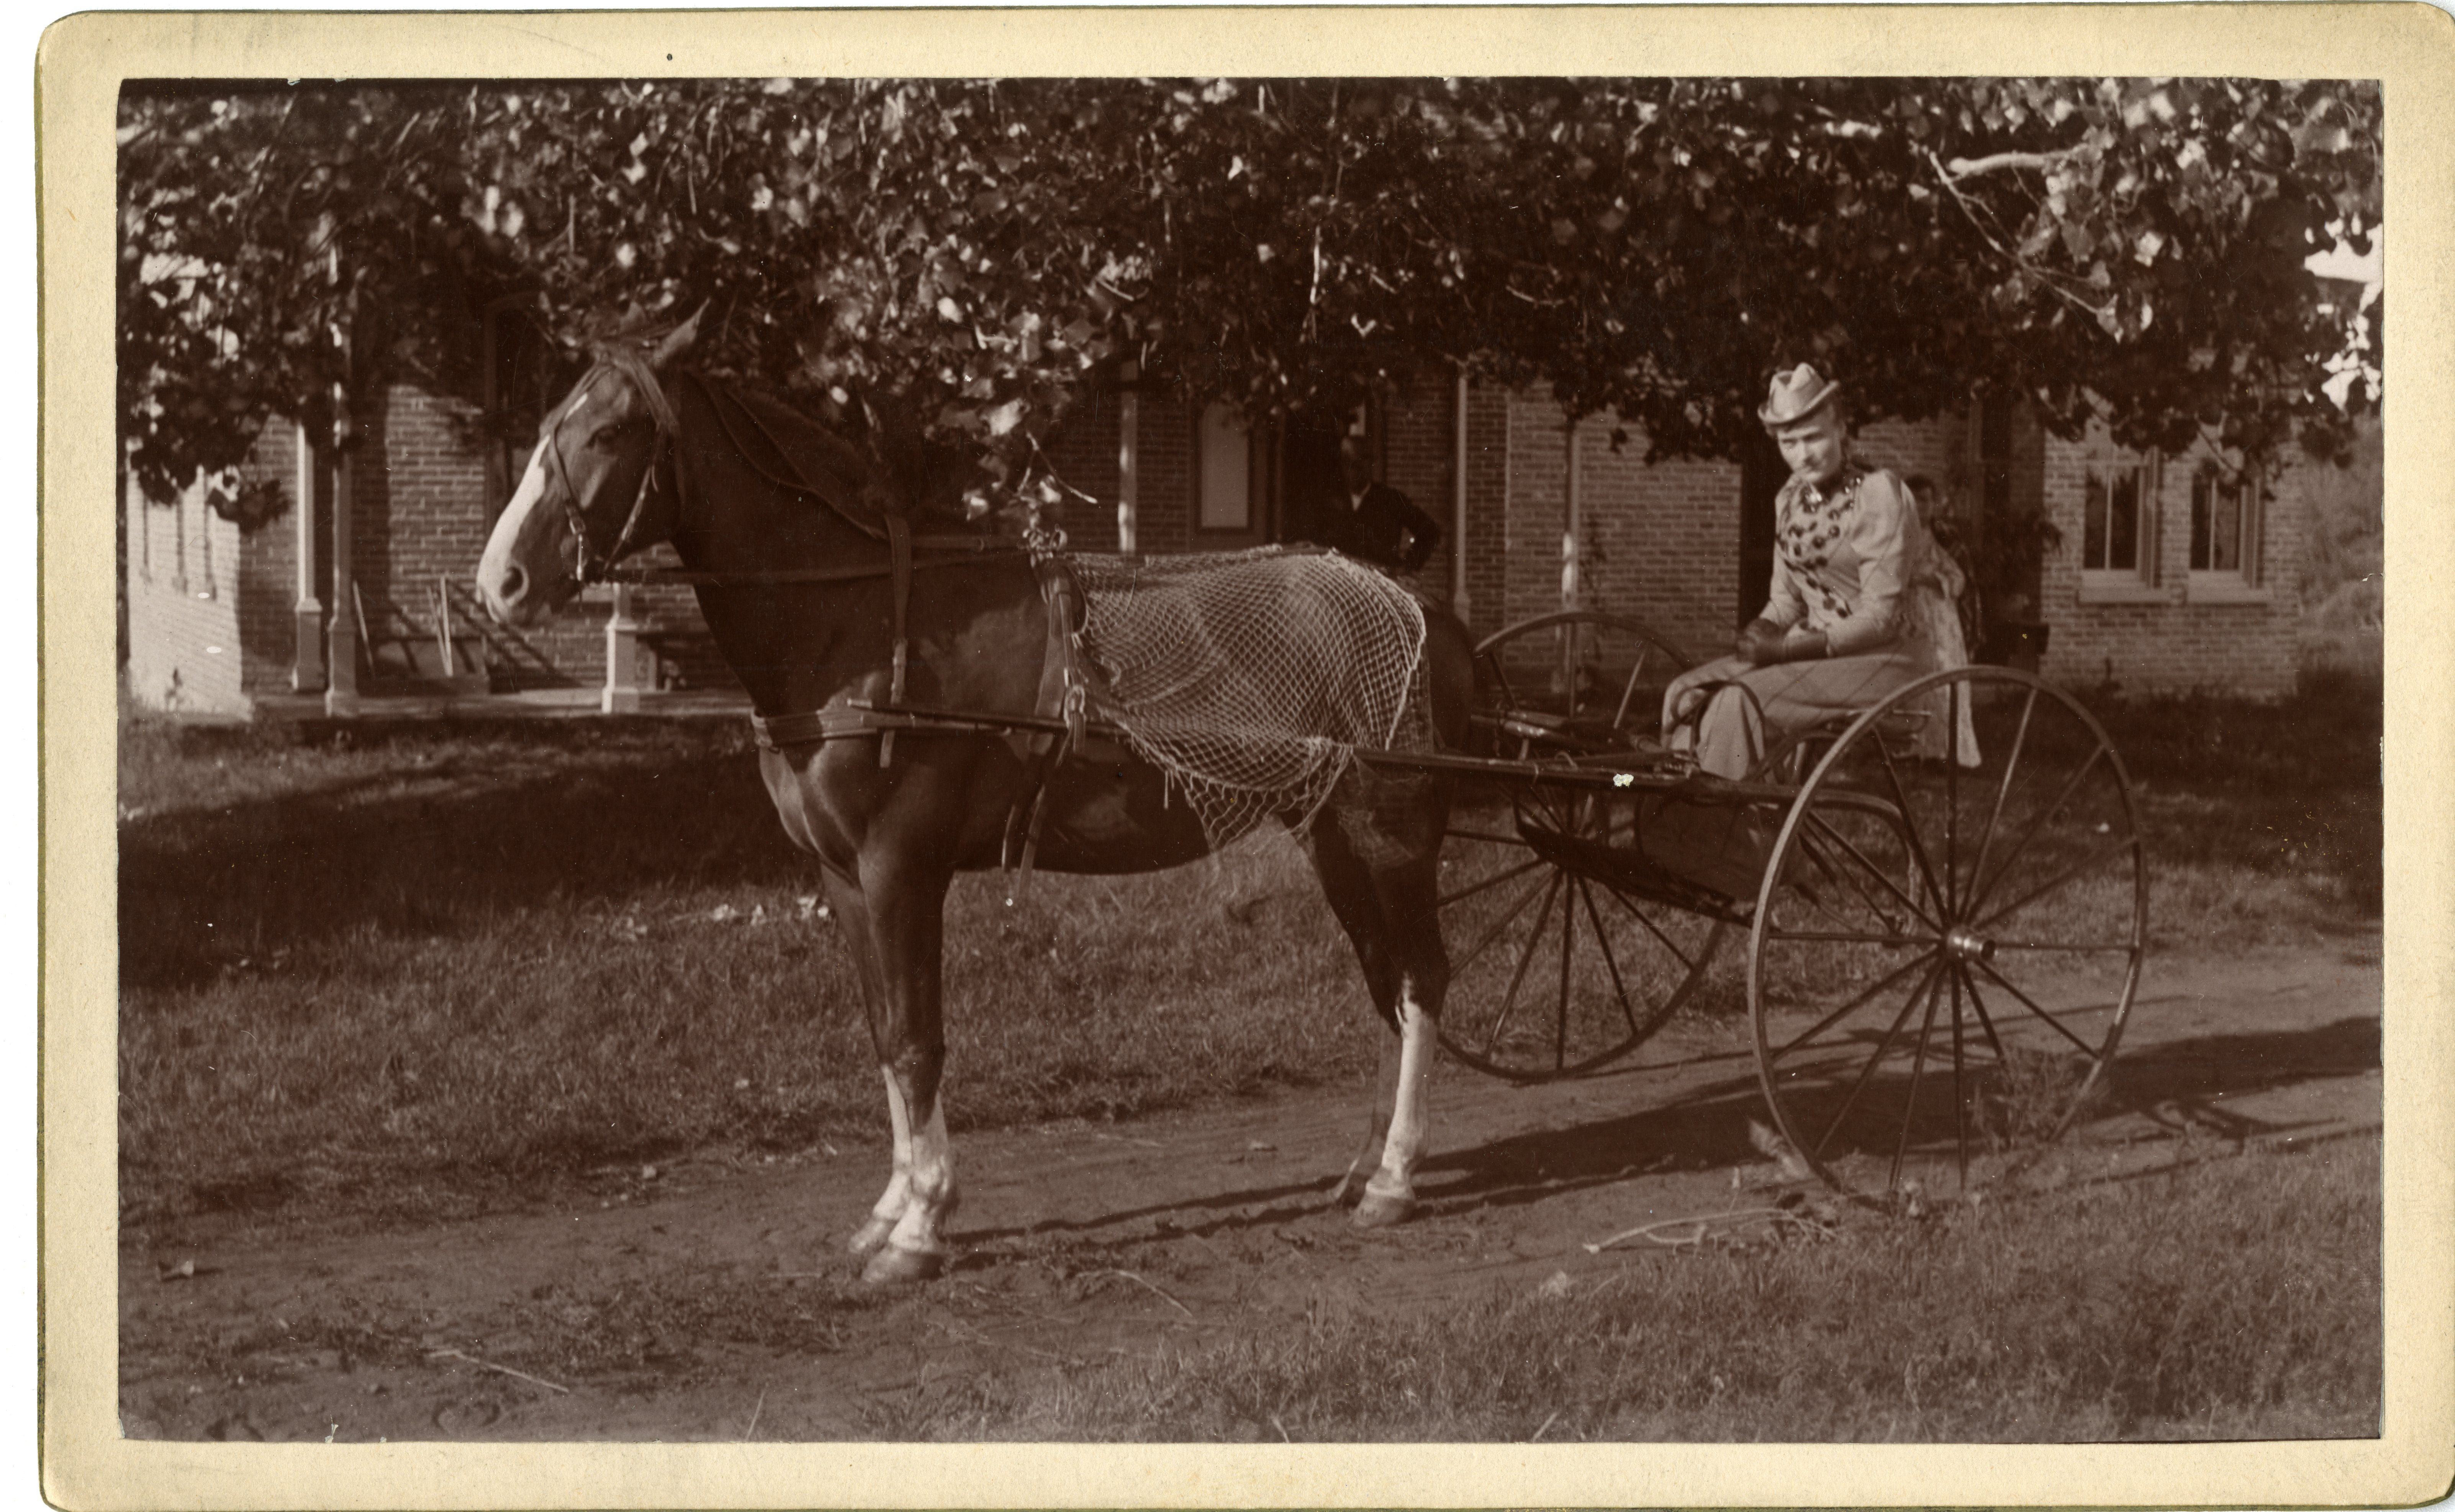 Woman on horse and buggy outside of house.